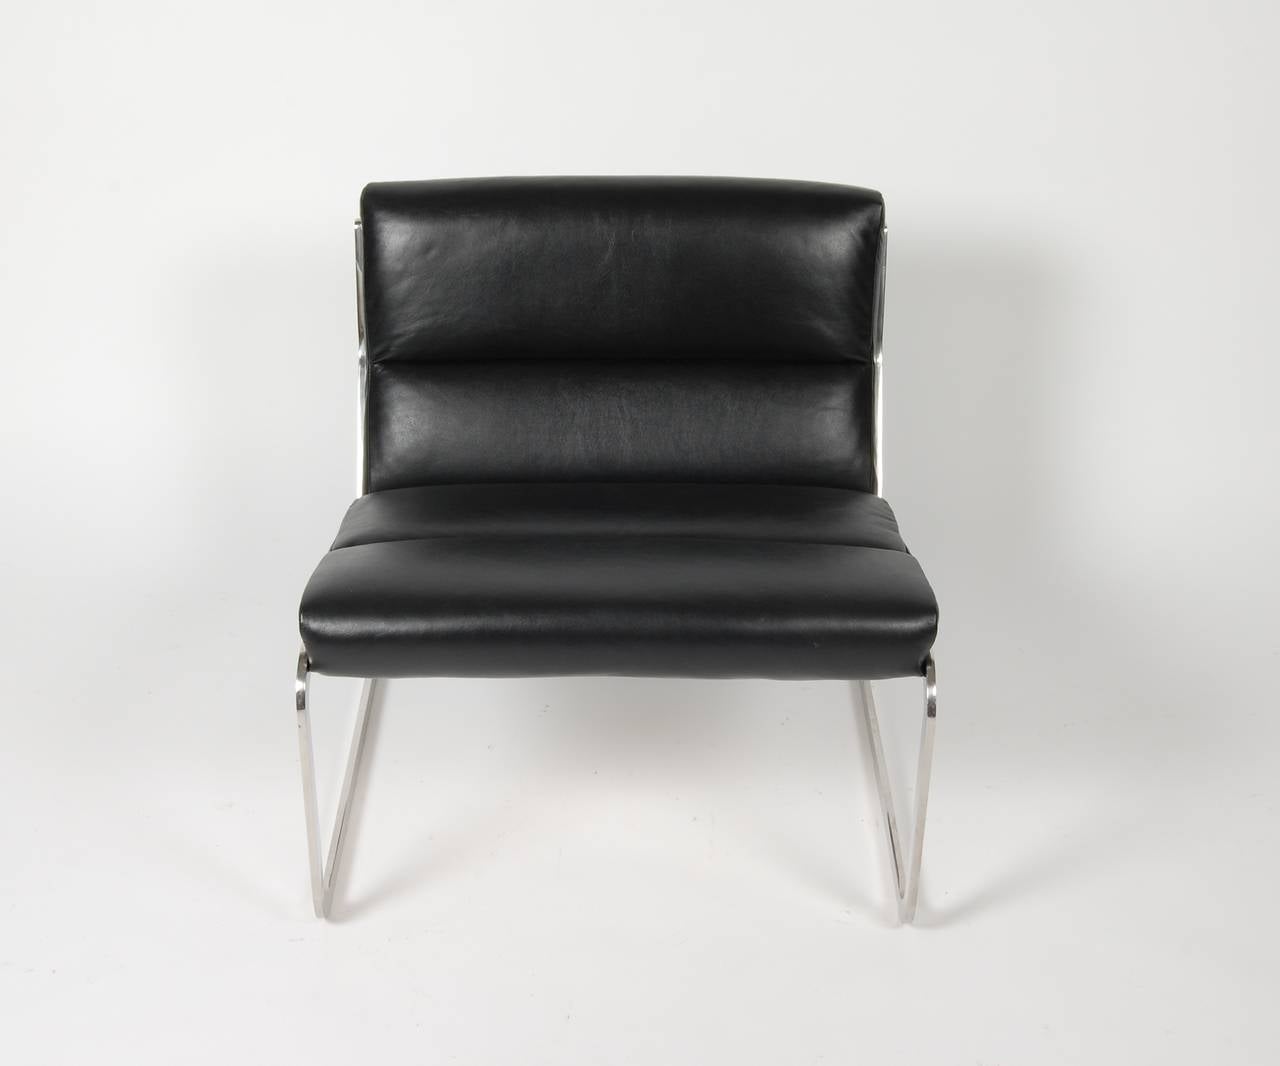 1960s vintage Cantilever lounge chair newly reupholstered in a glove soft black leather with a polished stainless steel frame. Having exceptional quality in the level of construction and design, the solid stainless steel frame is designed to flex